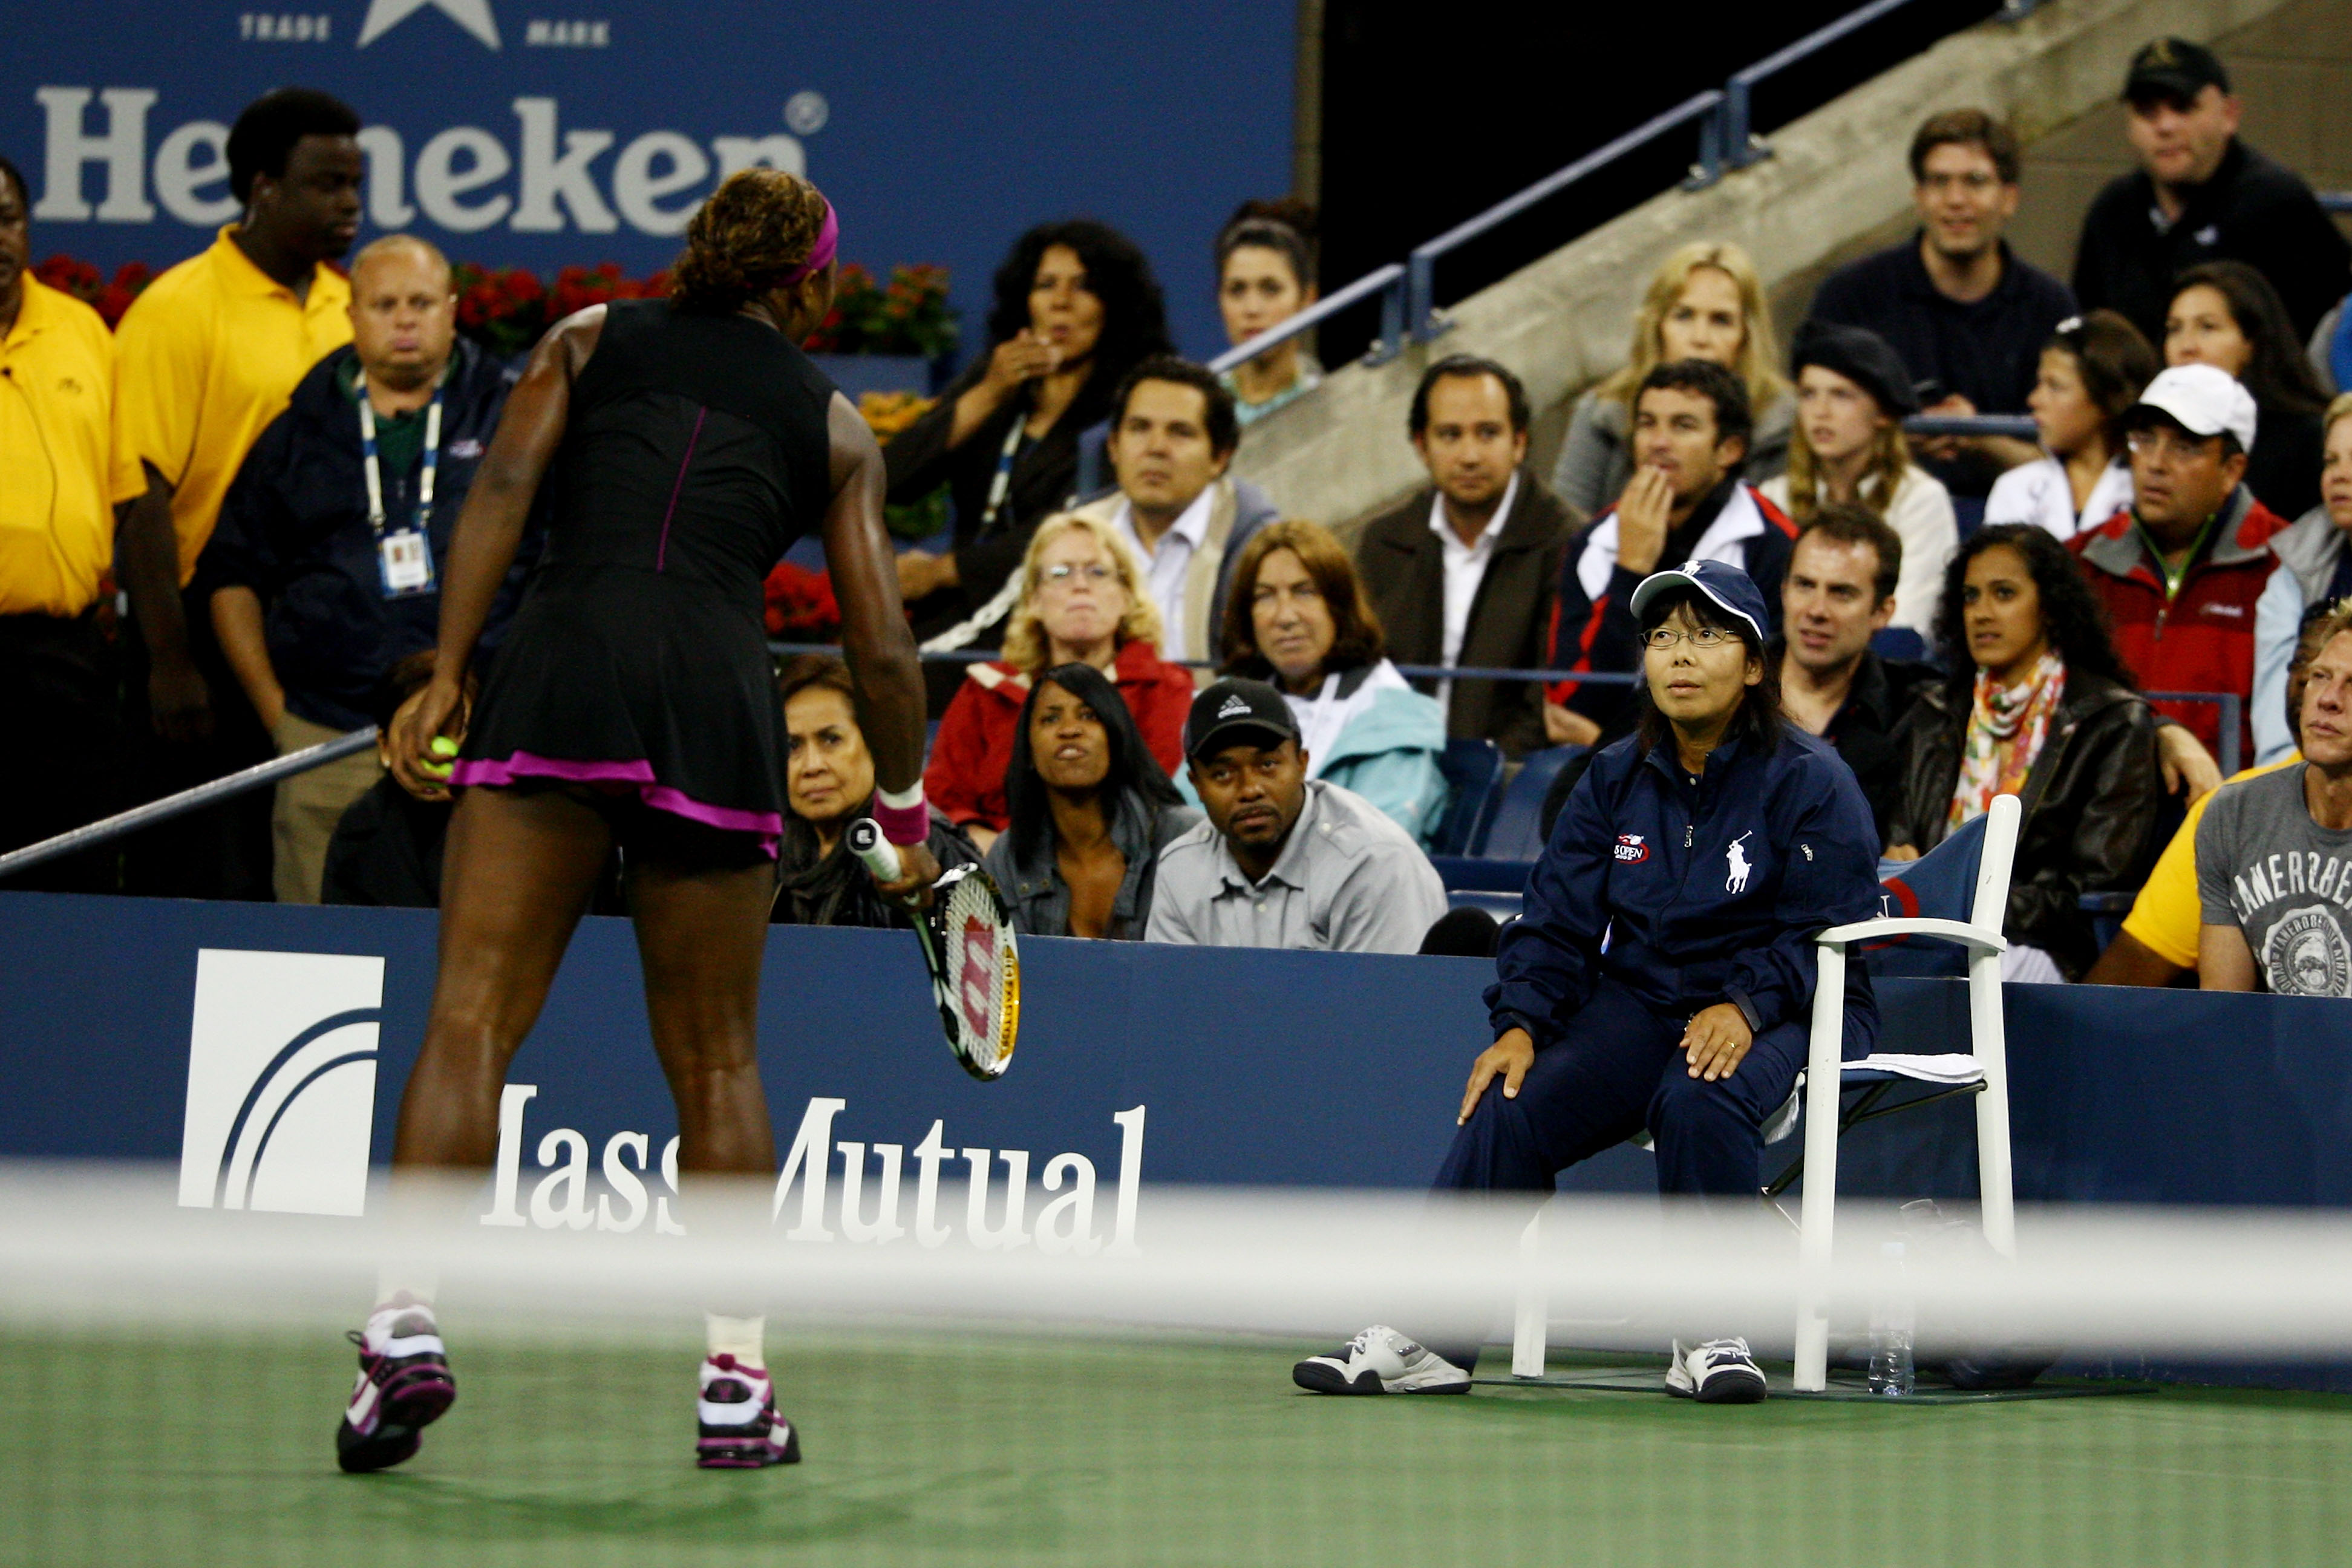 NEW YORK - SEPTEMBER 12:  Serena Williams (L) argues with a line judge during her Women's Singles Semifinal match against Kim Clijsters of Belgium on day thirteen of the 2009 U.S. Open at the USTA Billie Jean King National Tennis Center on September 12, 2